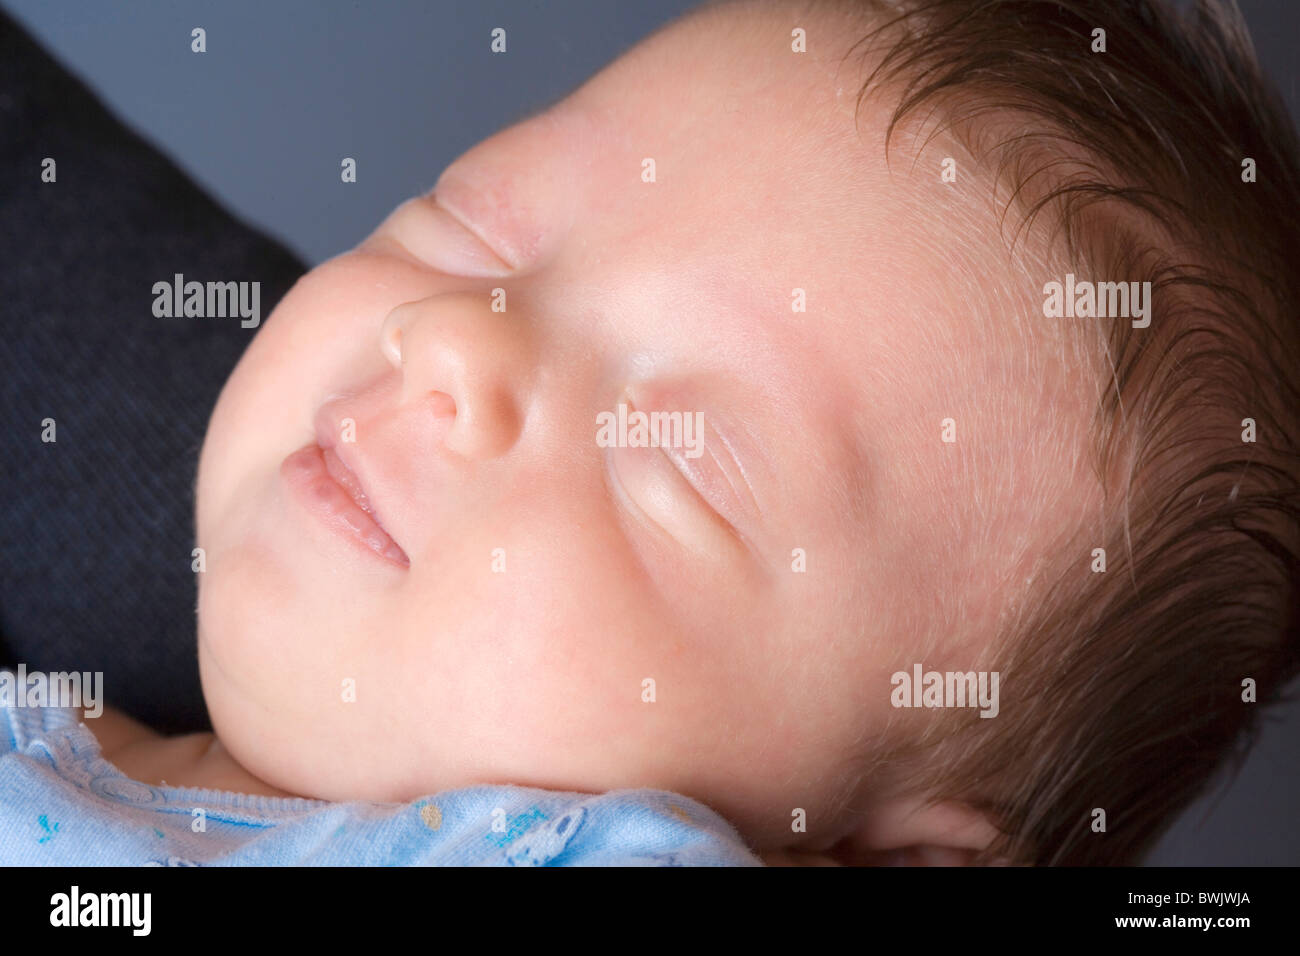 0-1 month 1-6 months 2 30-35 years 30s adult Adult Affection At home Babies Baby Care Caring Caucasian Ch Stock Photo